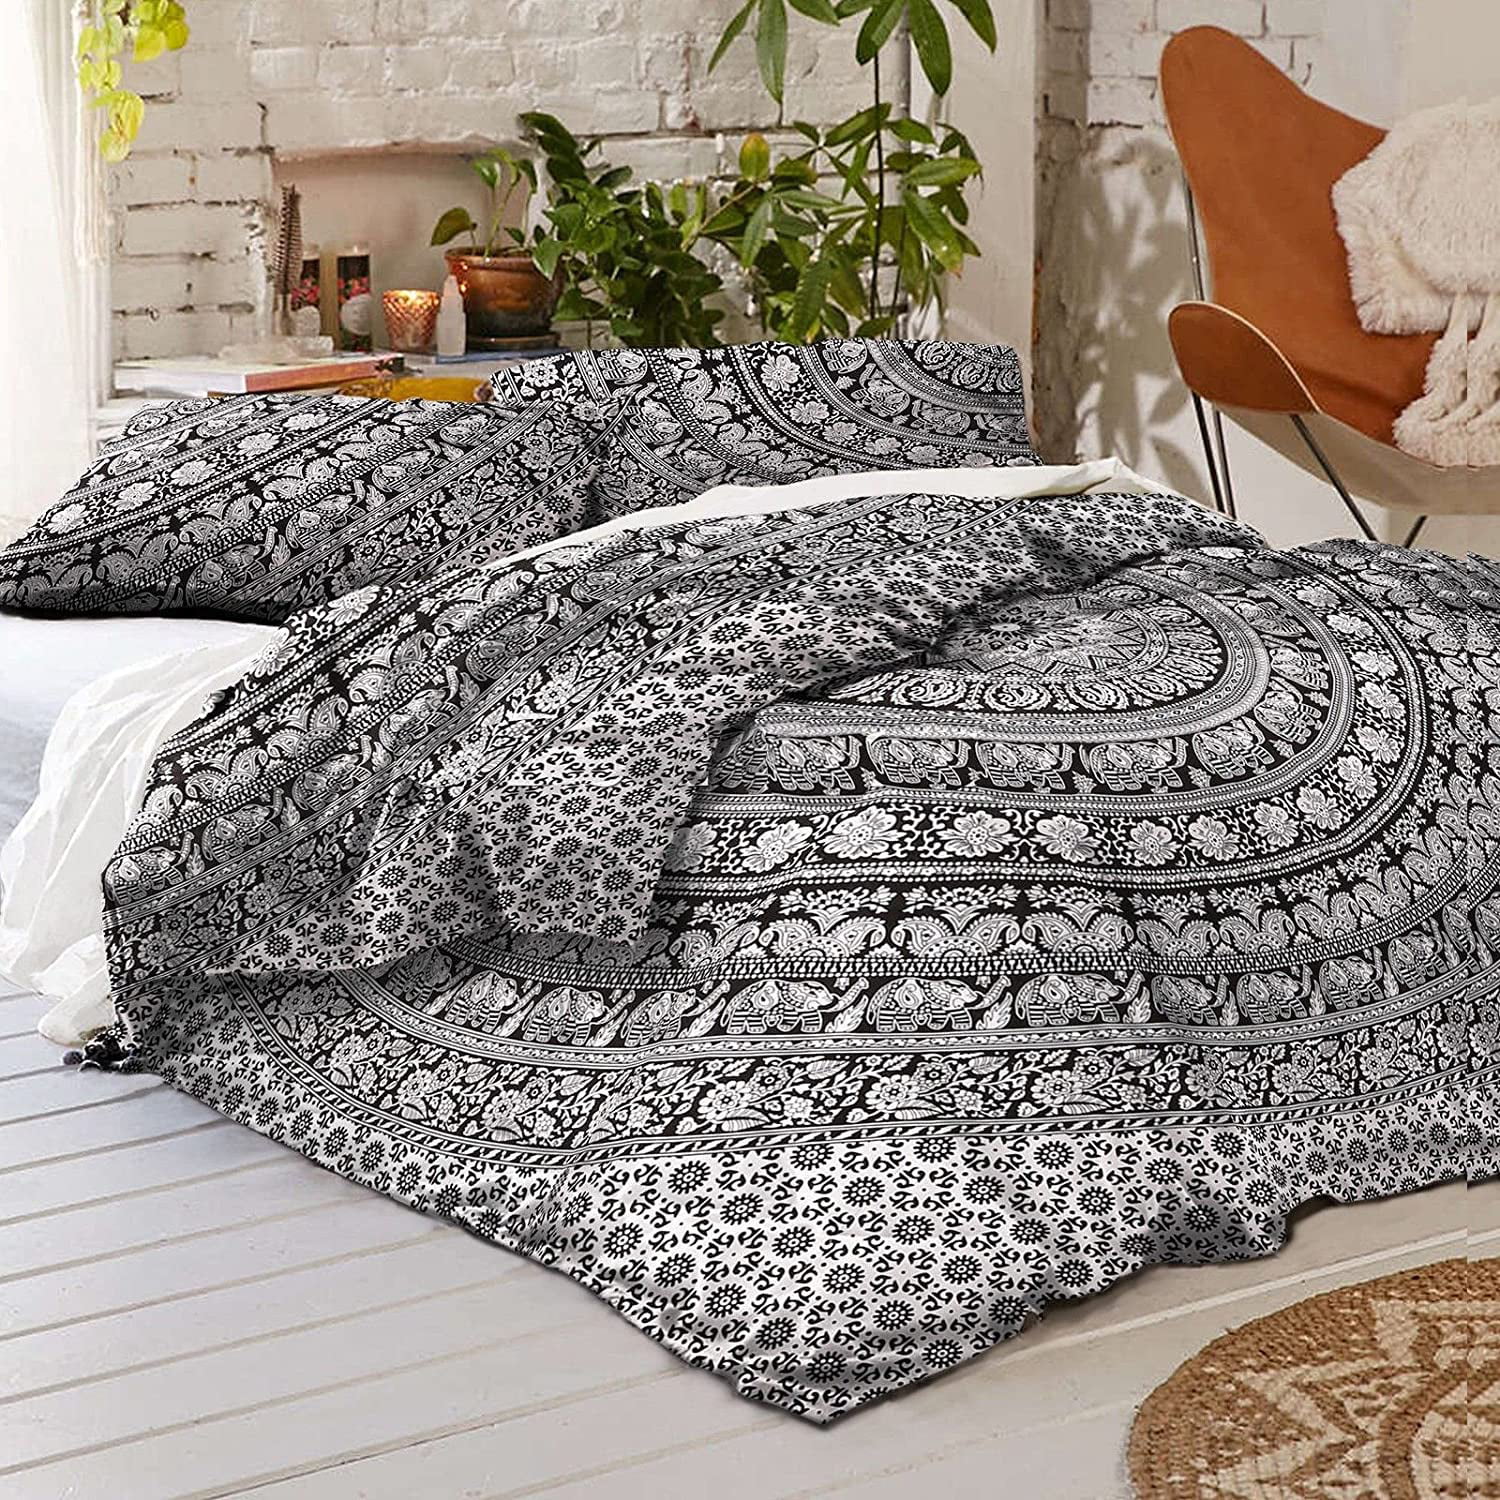 Indian Mandala Kantha Quilt Bedspreads Cotton Bedding Throw Single/Double Size 